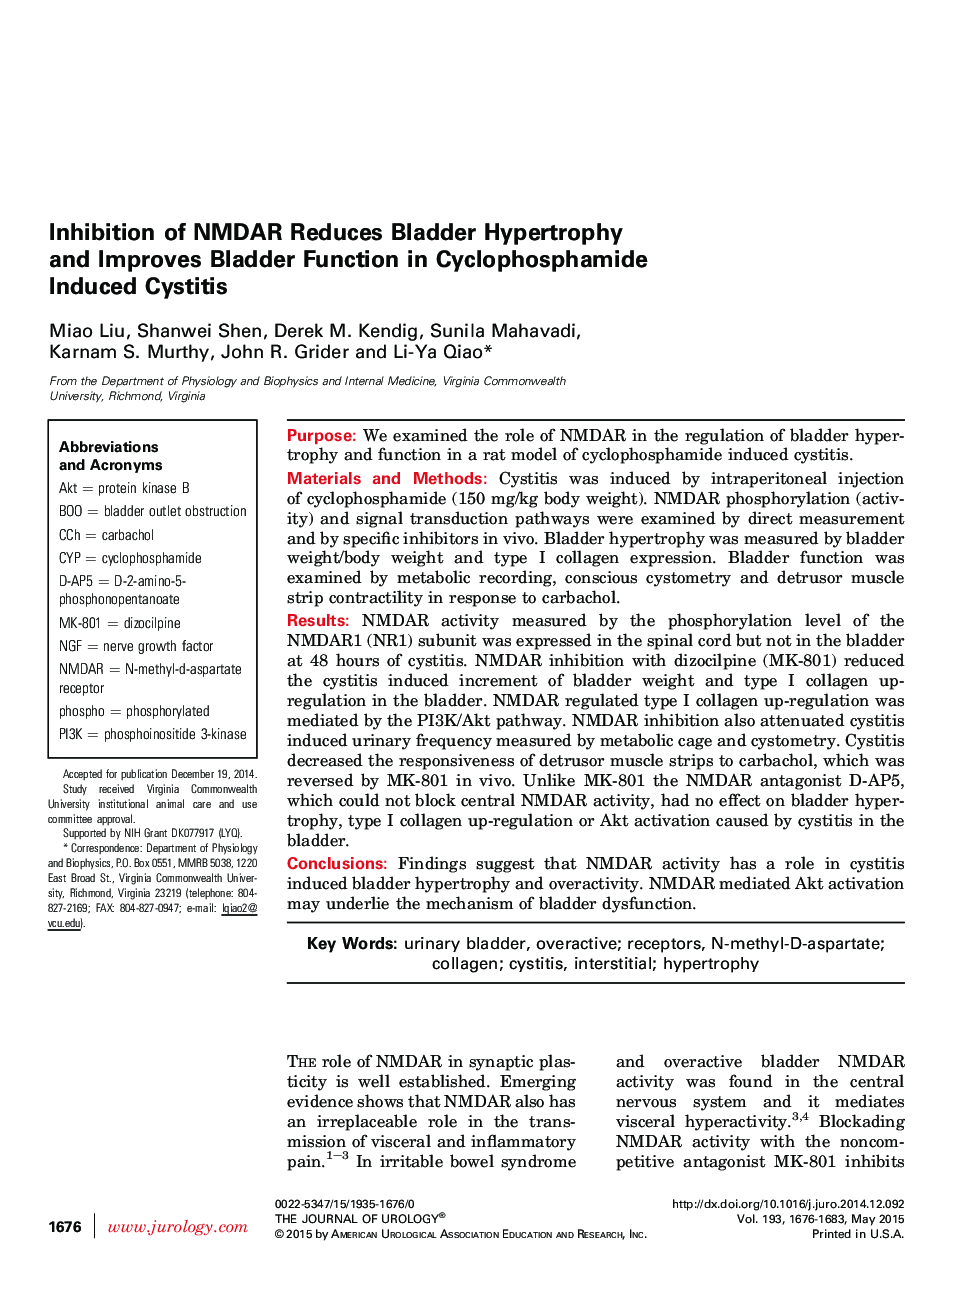 Inhibition of NMDAR Reduces Bladder Hypertrophy and Improves Bladder Function in Cyclophosphamide Induced Cystitis